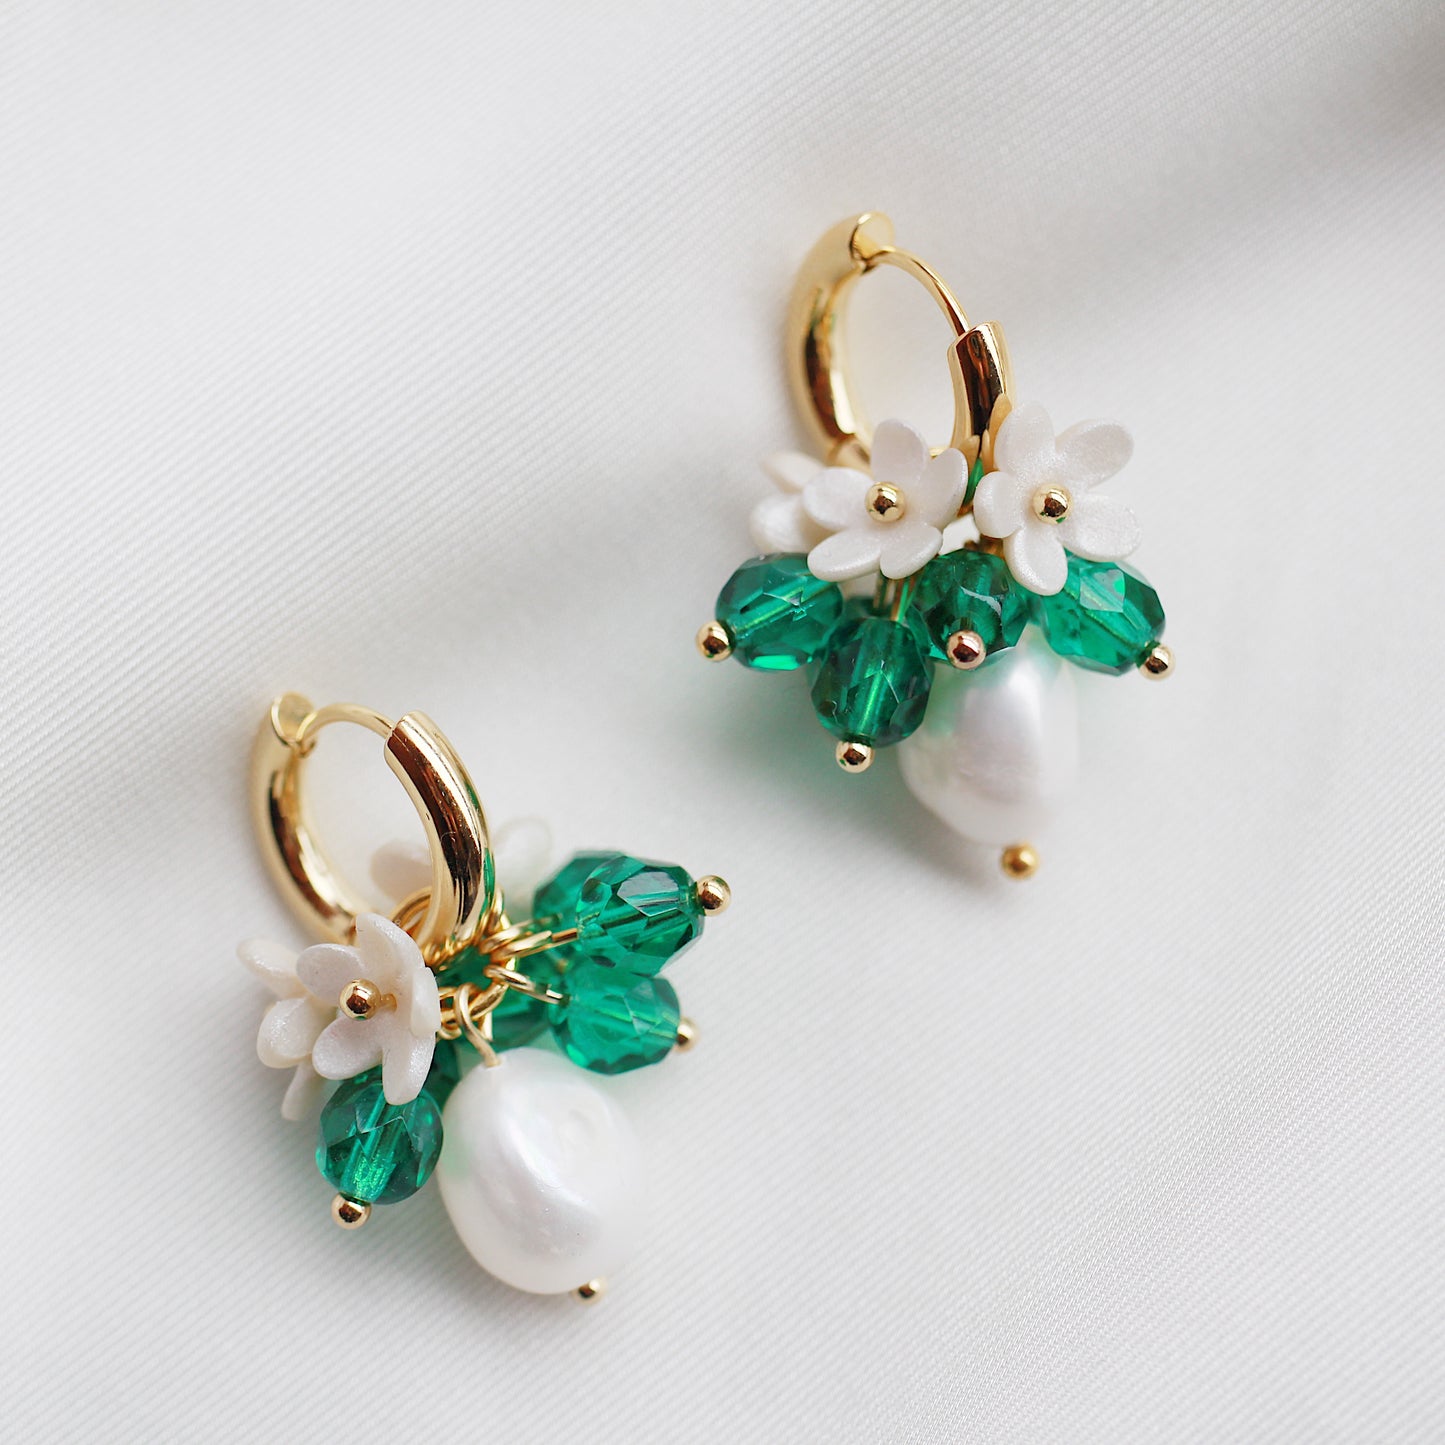 PRE-ORDER: Mindy in Emerald green, charms only